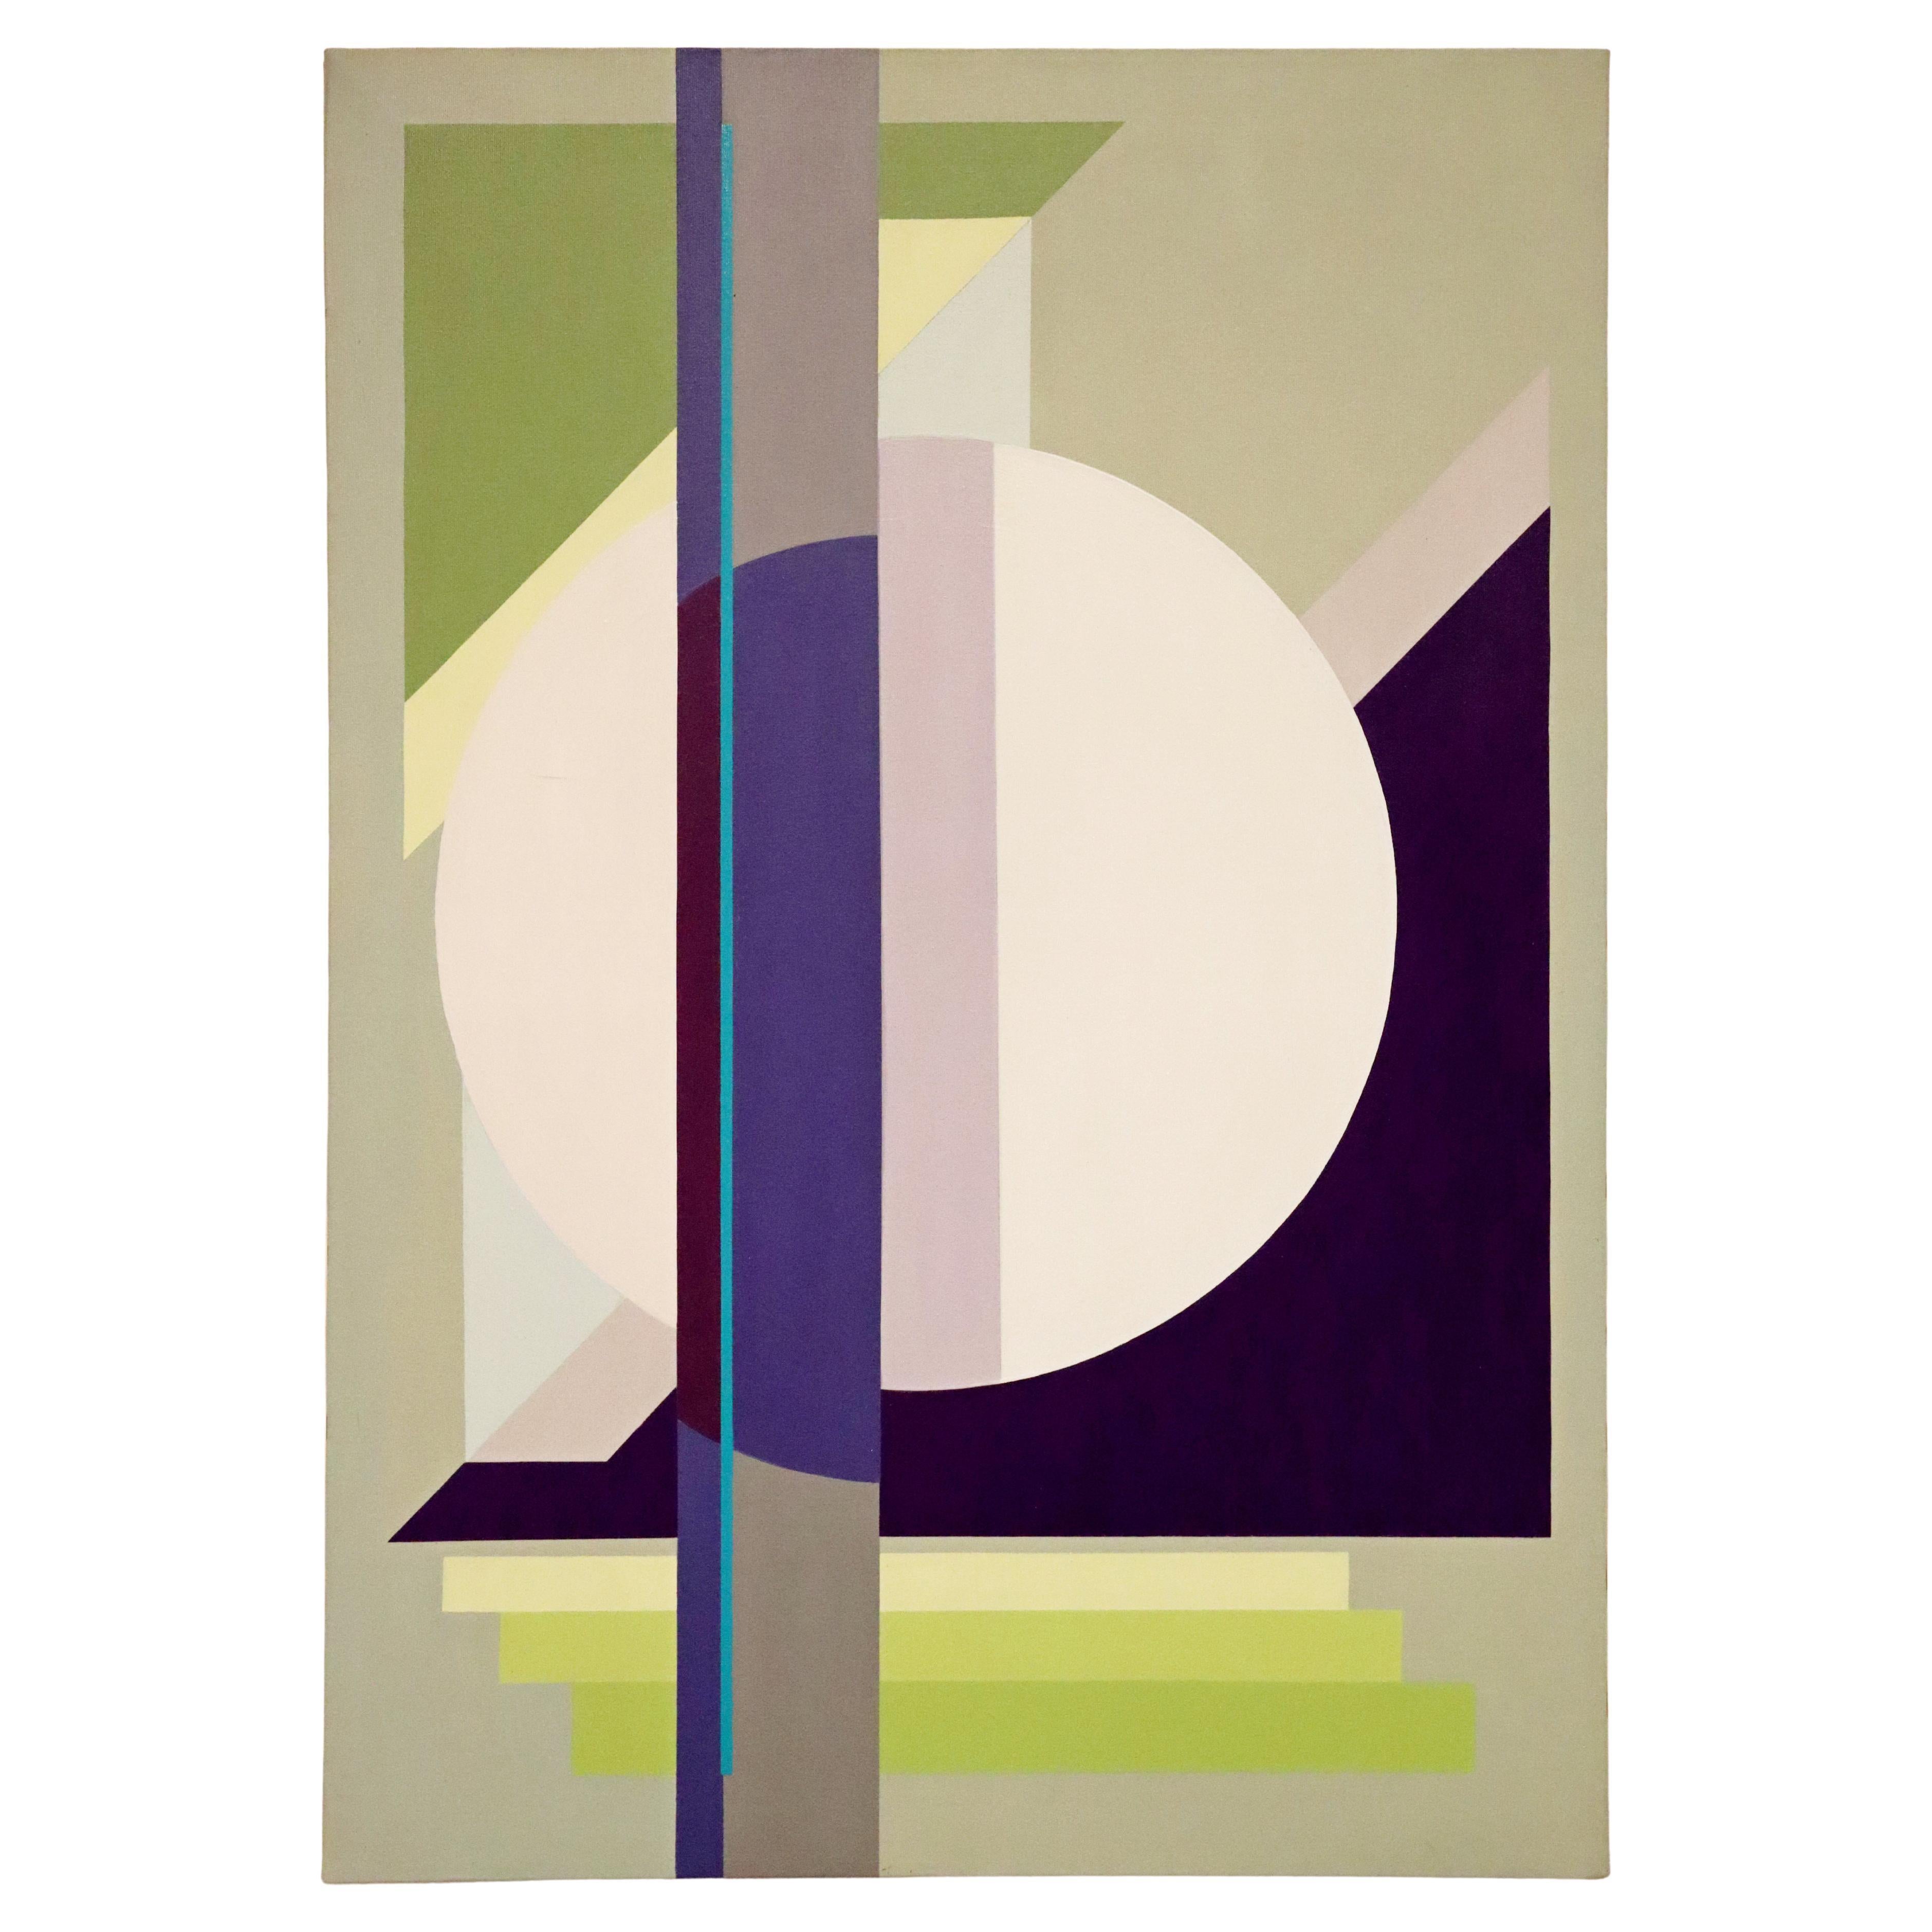 Modernist Gunda Hass Signed Acrylic Painting on Canvas Green Purple Gray, 2010s For Sale